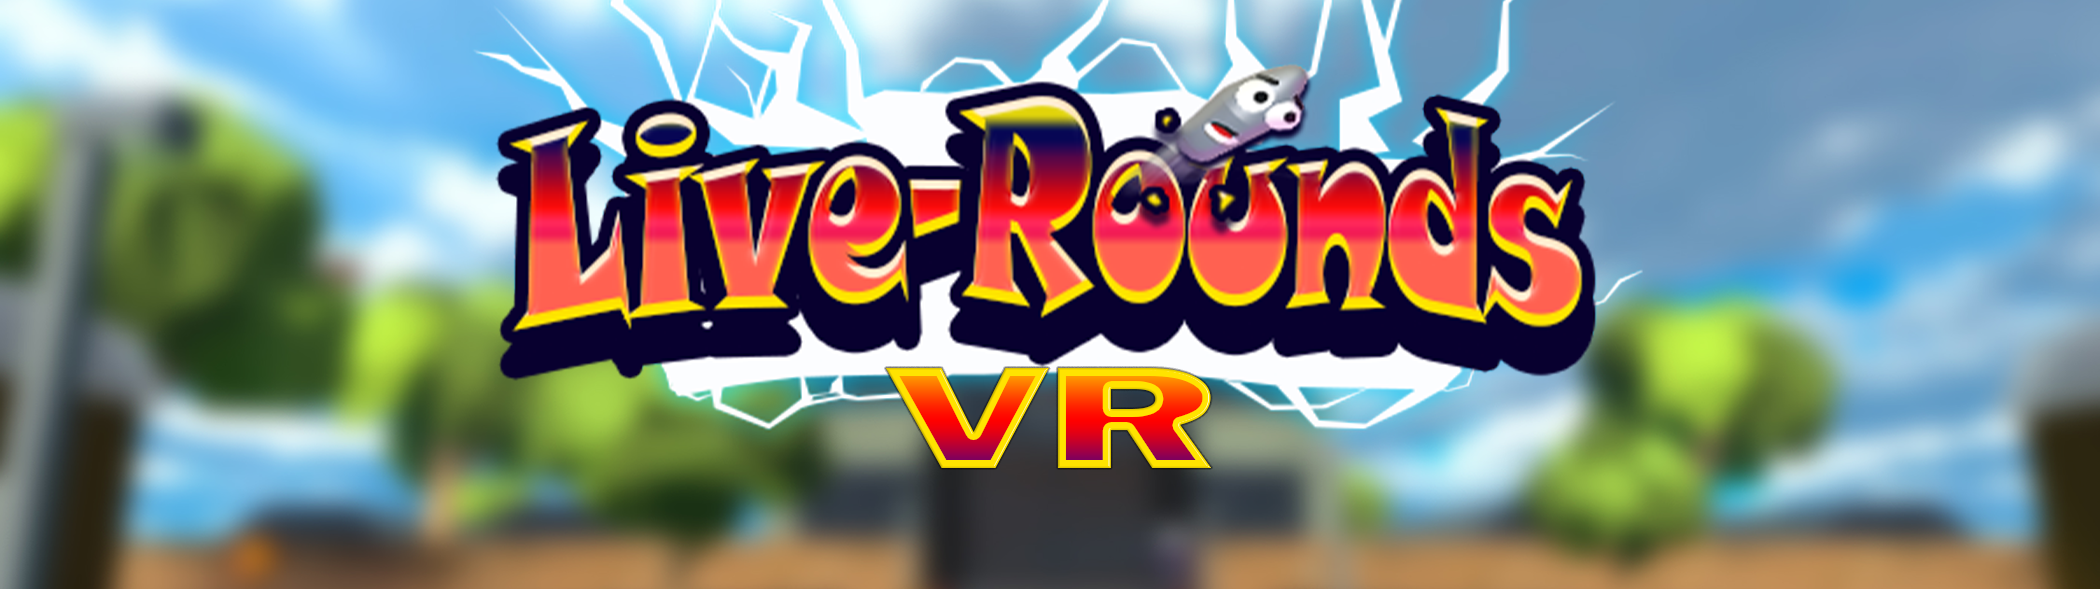 Live Rounds VR